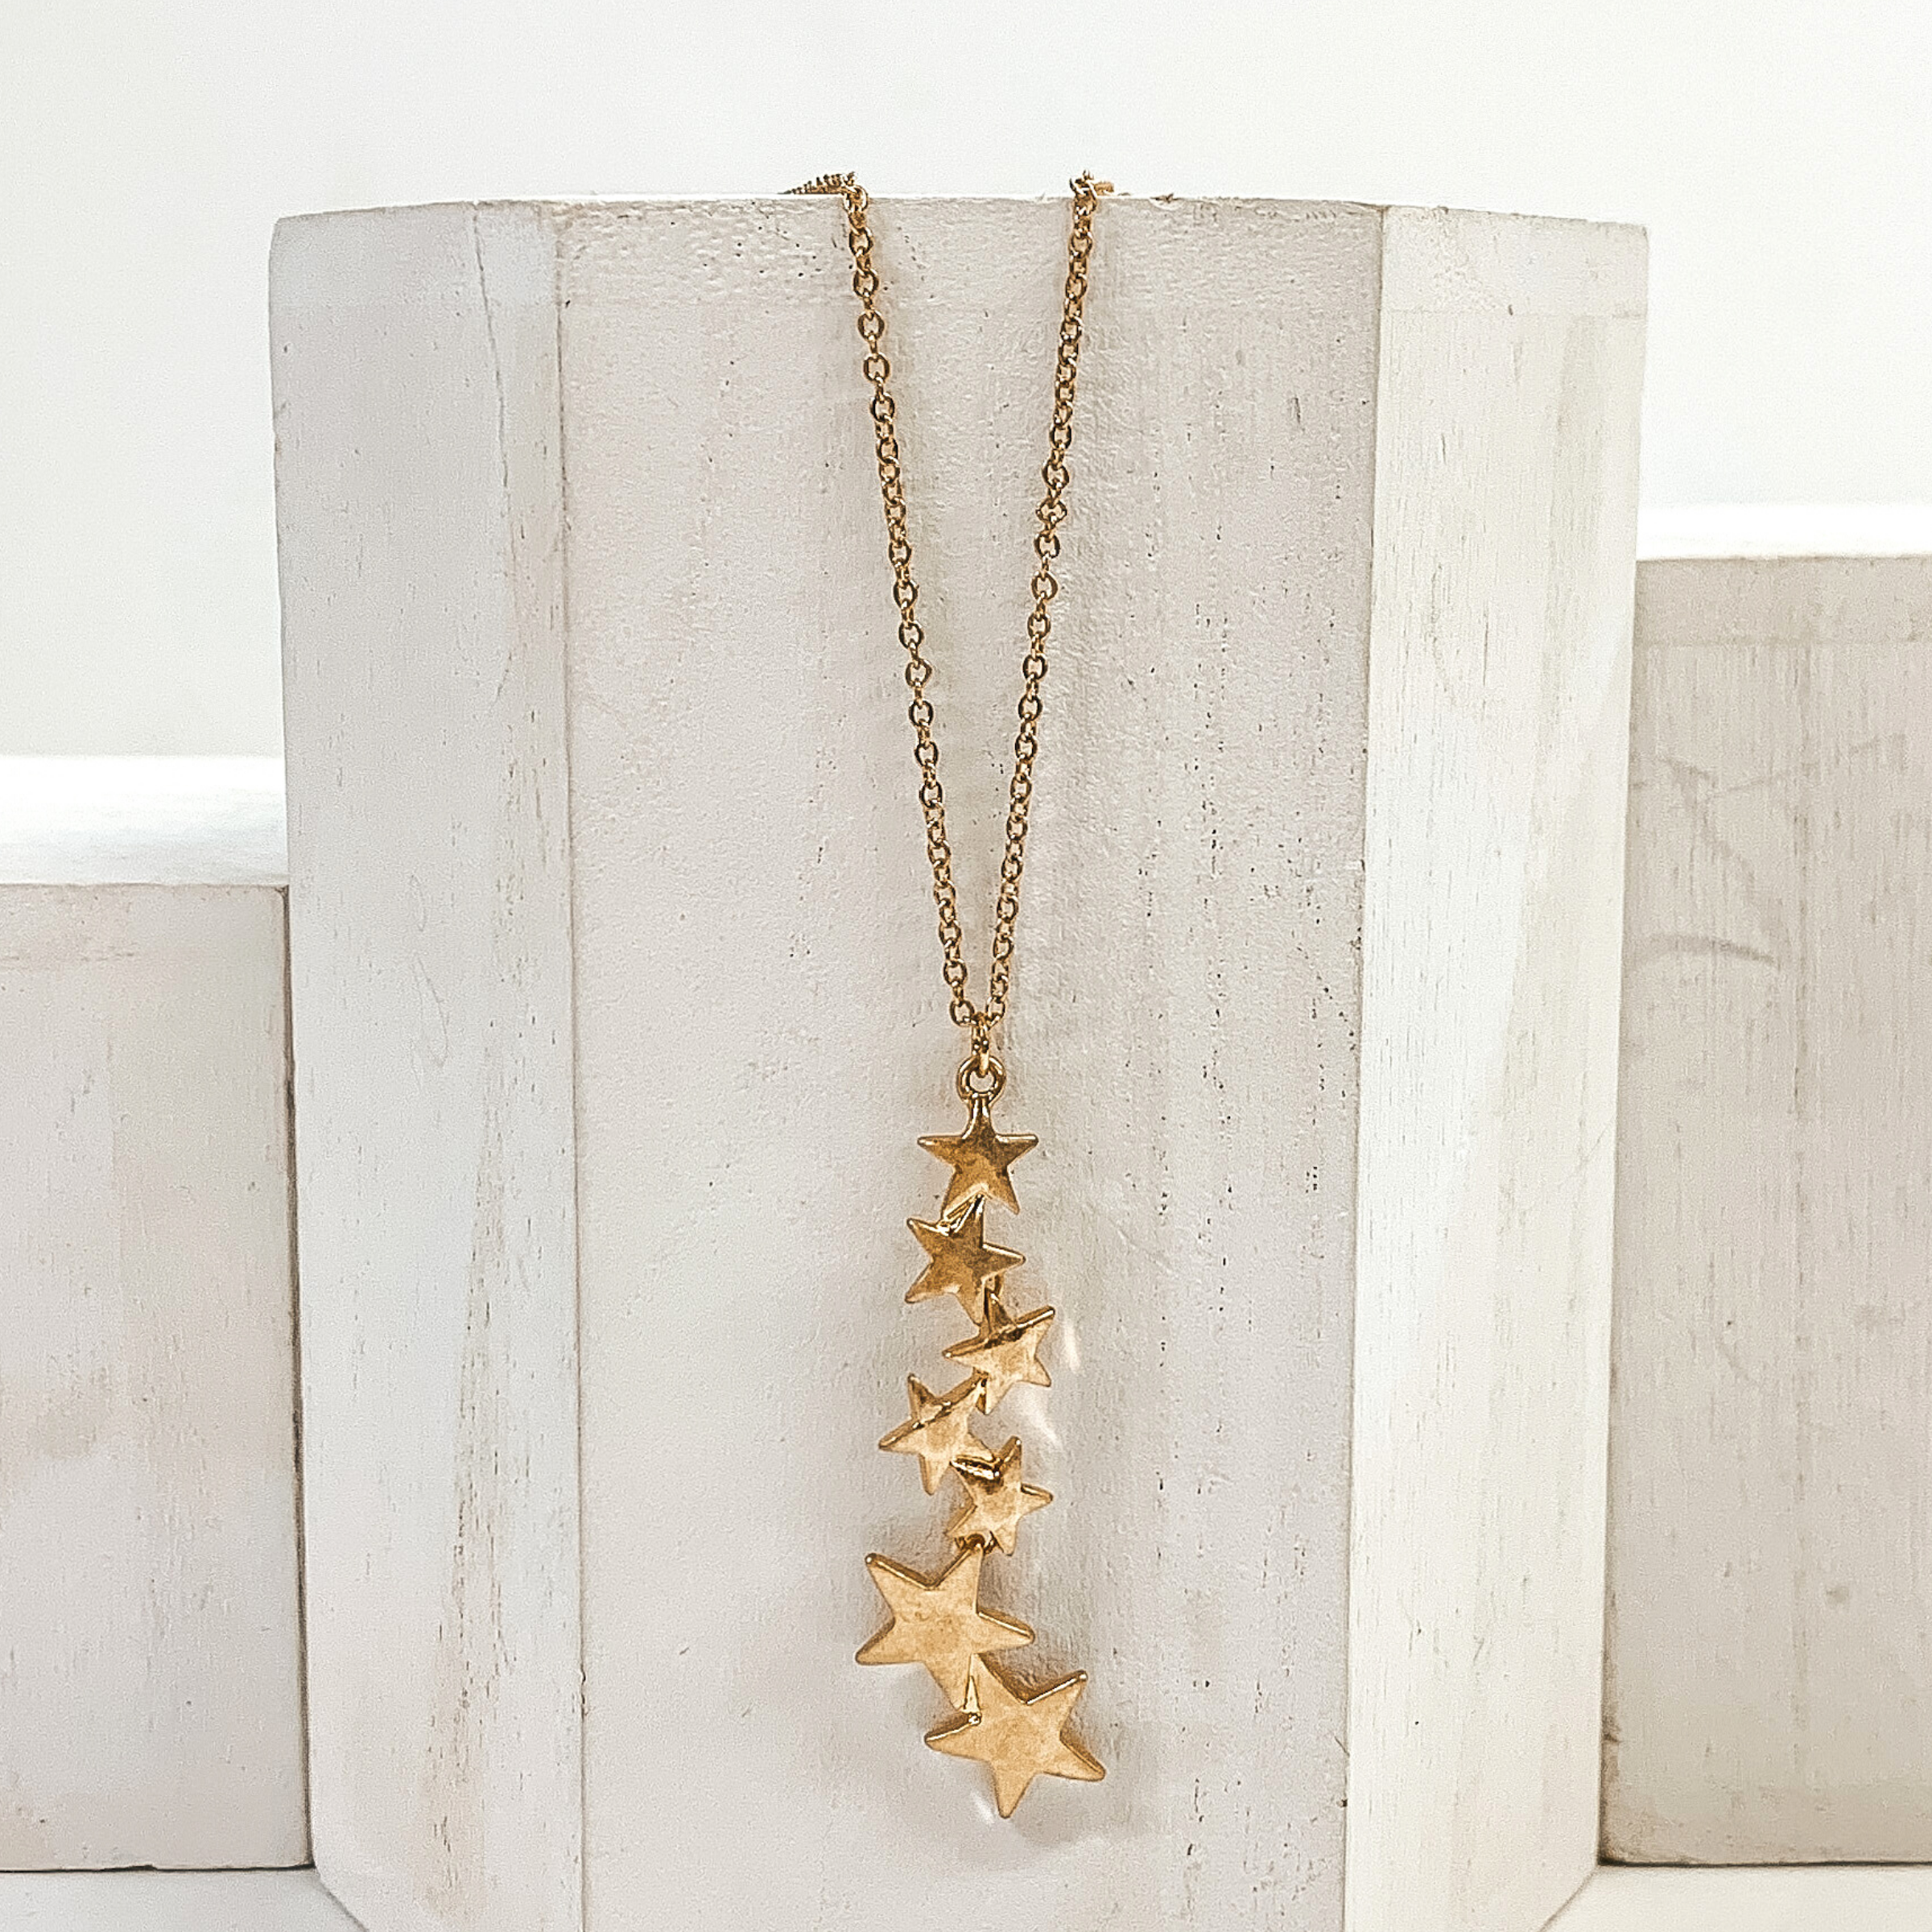 Simple Chain Necklace with Star Drop Pendant in Gold - Giddy Up Glamour Boutique